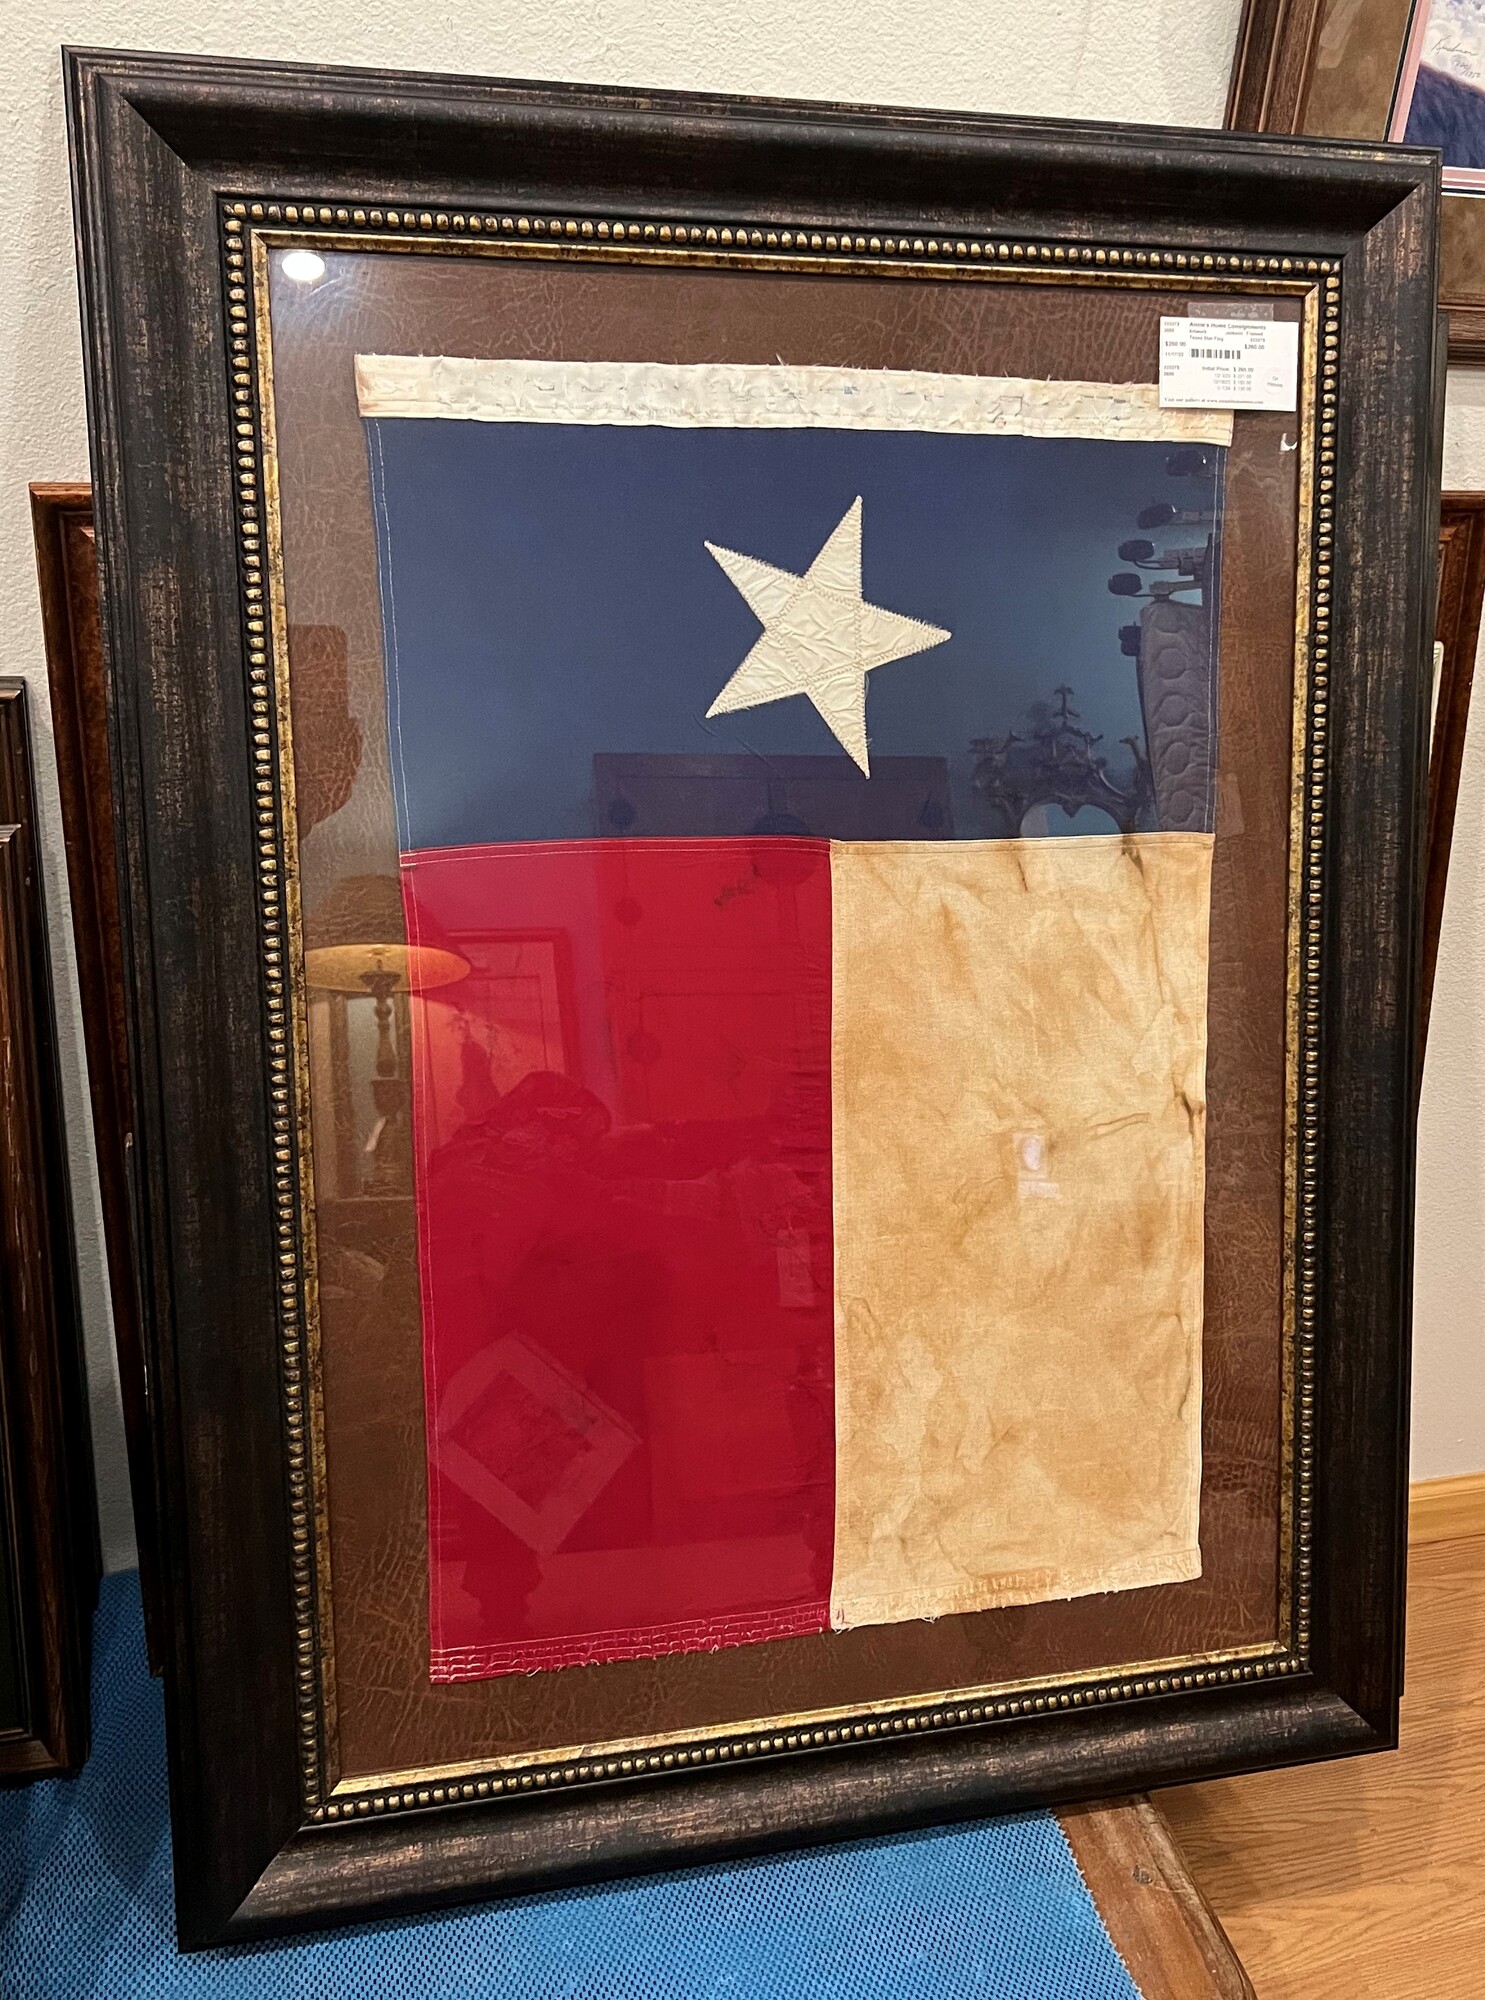 Texas Star Flag, Looks Old, Framed
36in x 48in